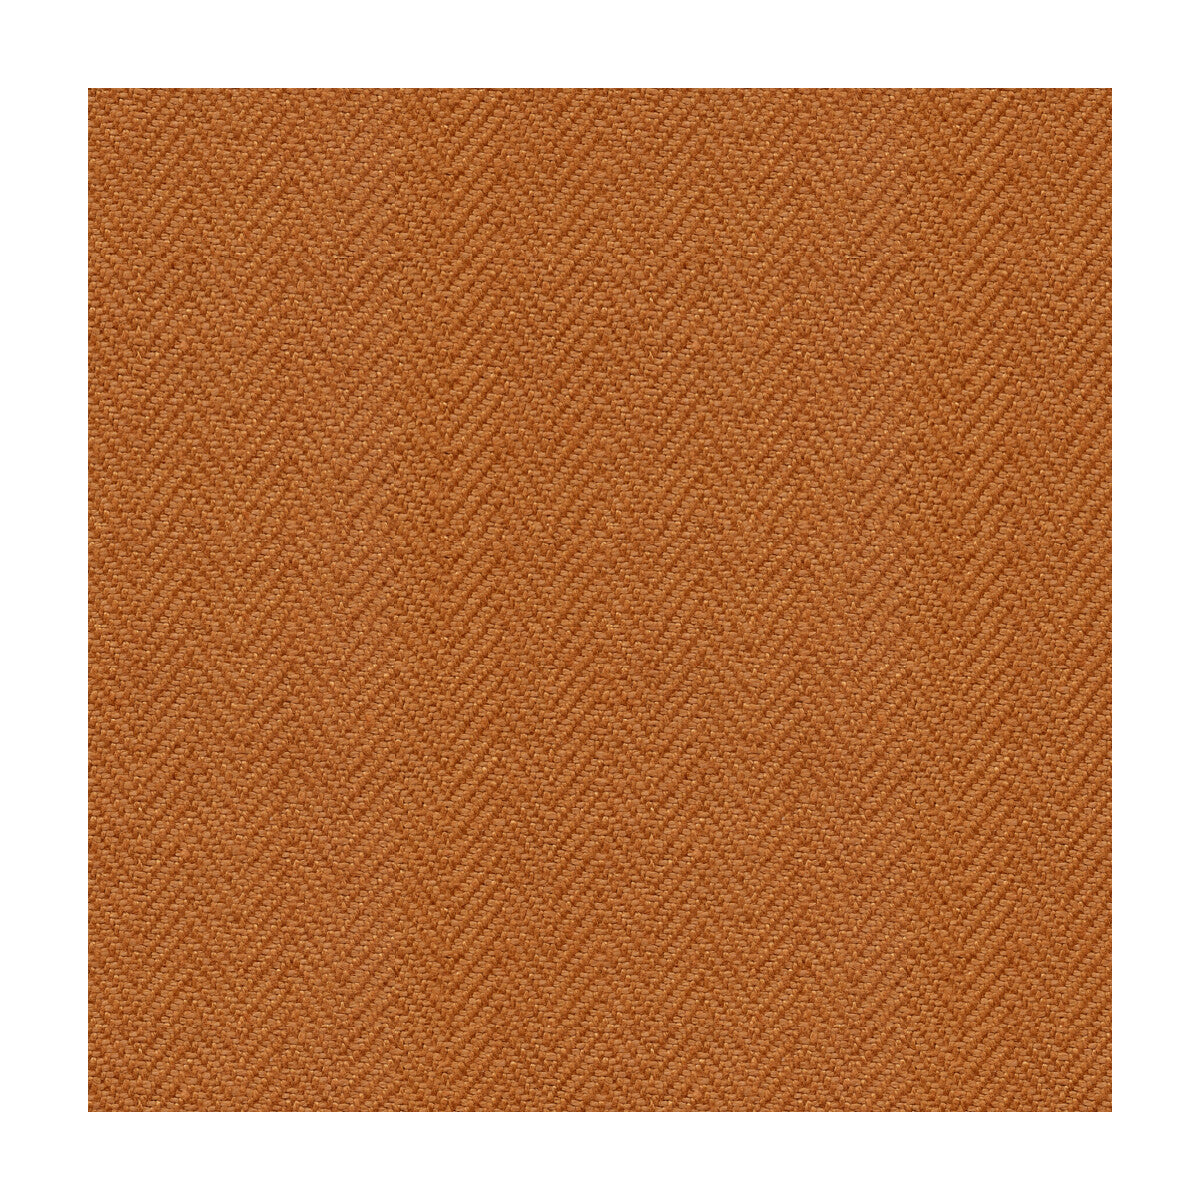 Wye Herringbone fabric in nutmeg color - pattern 2015154.616.0 - by Lee Jofa in the Colour Library VII collection